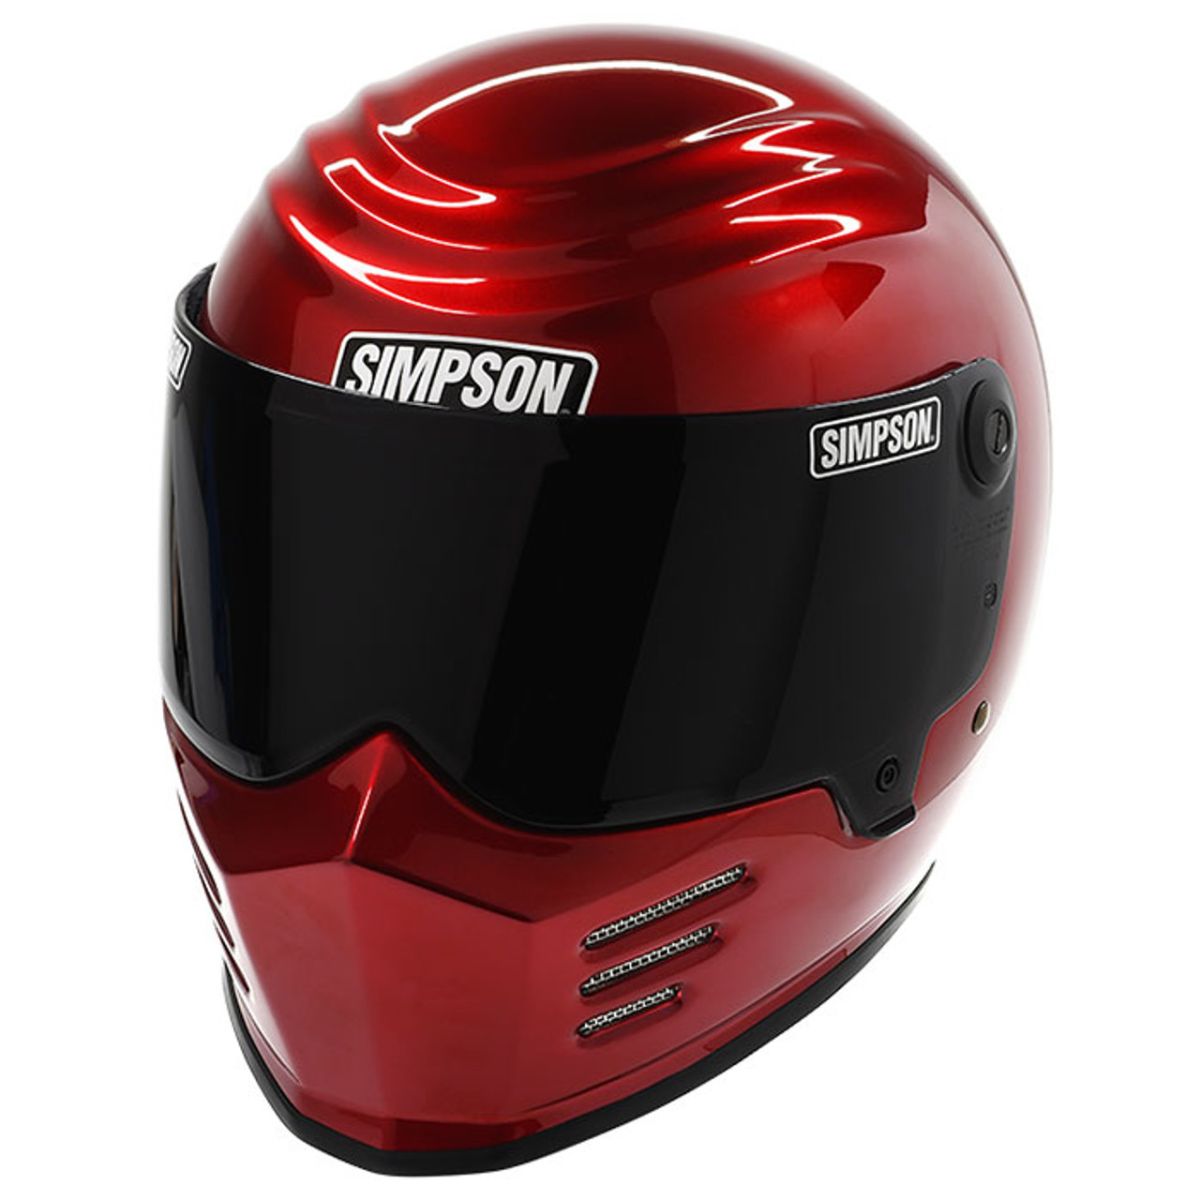 Simpson Racing Products - Simpson Racing Products Outlaw Bandit Motorcycle Helmet - Candee Red